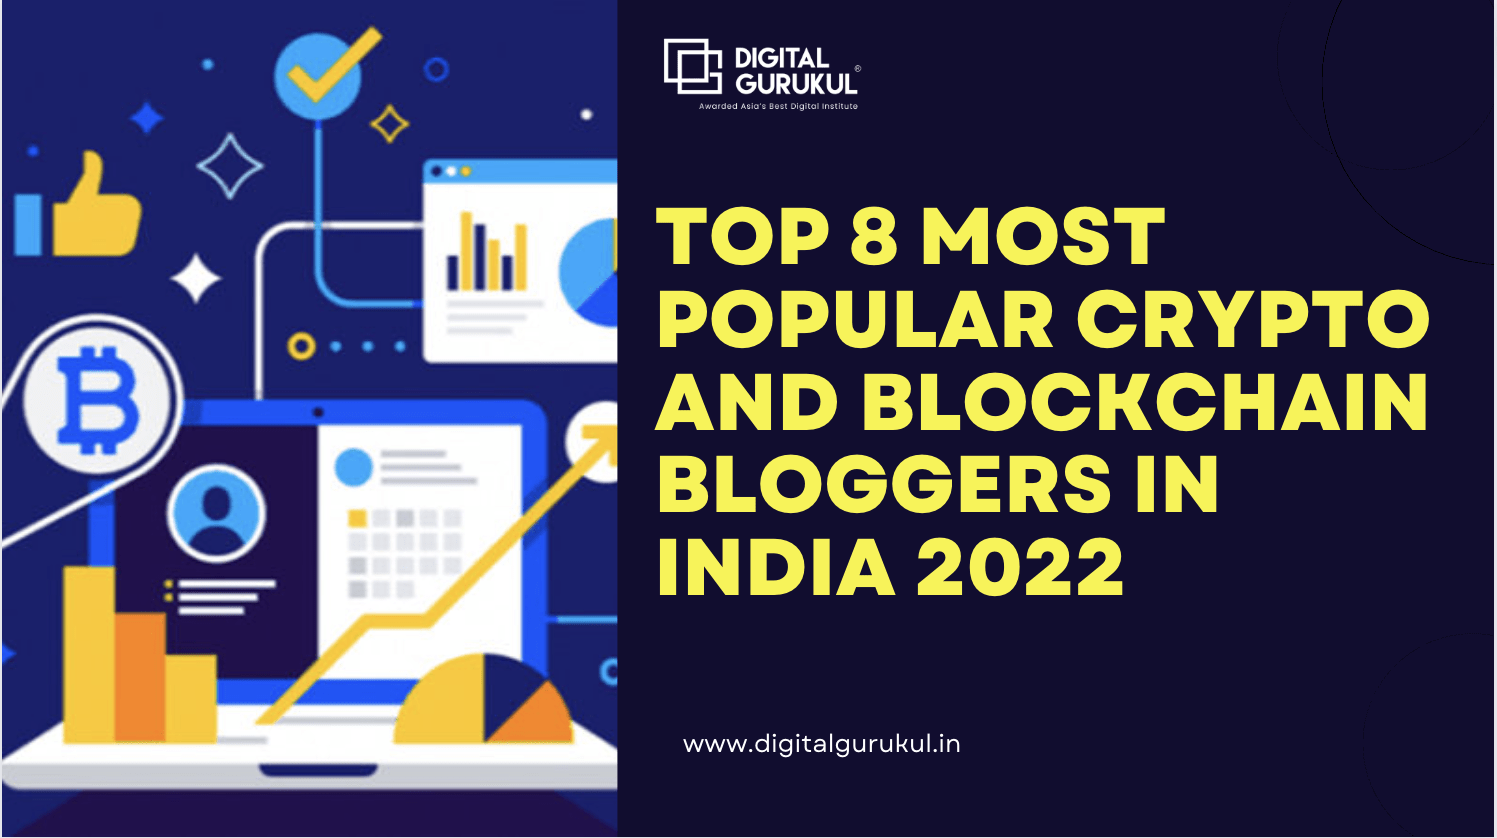 Top 8 most popular crypto and blockchain bloggers in India 2022